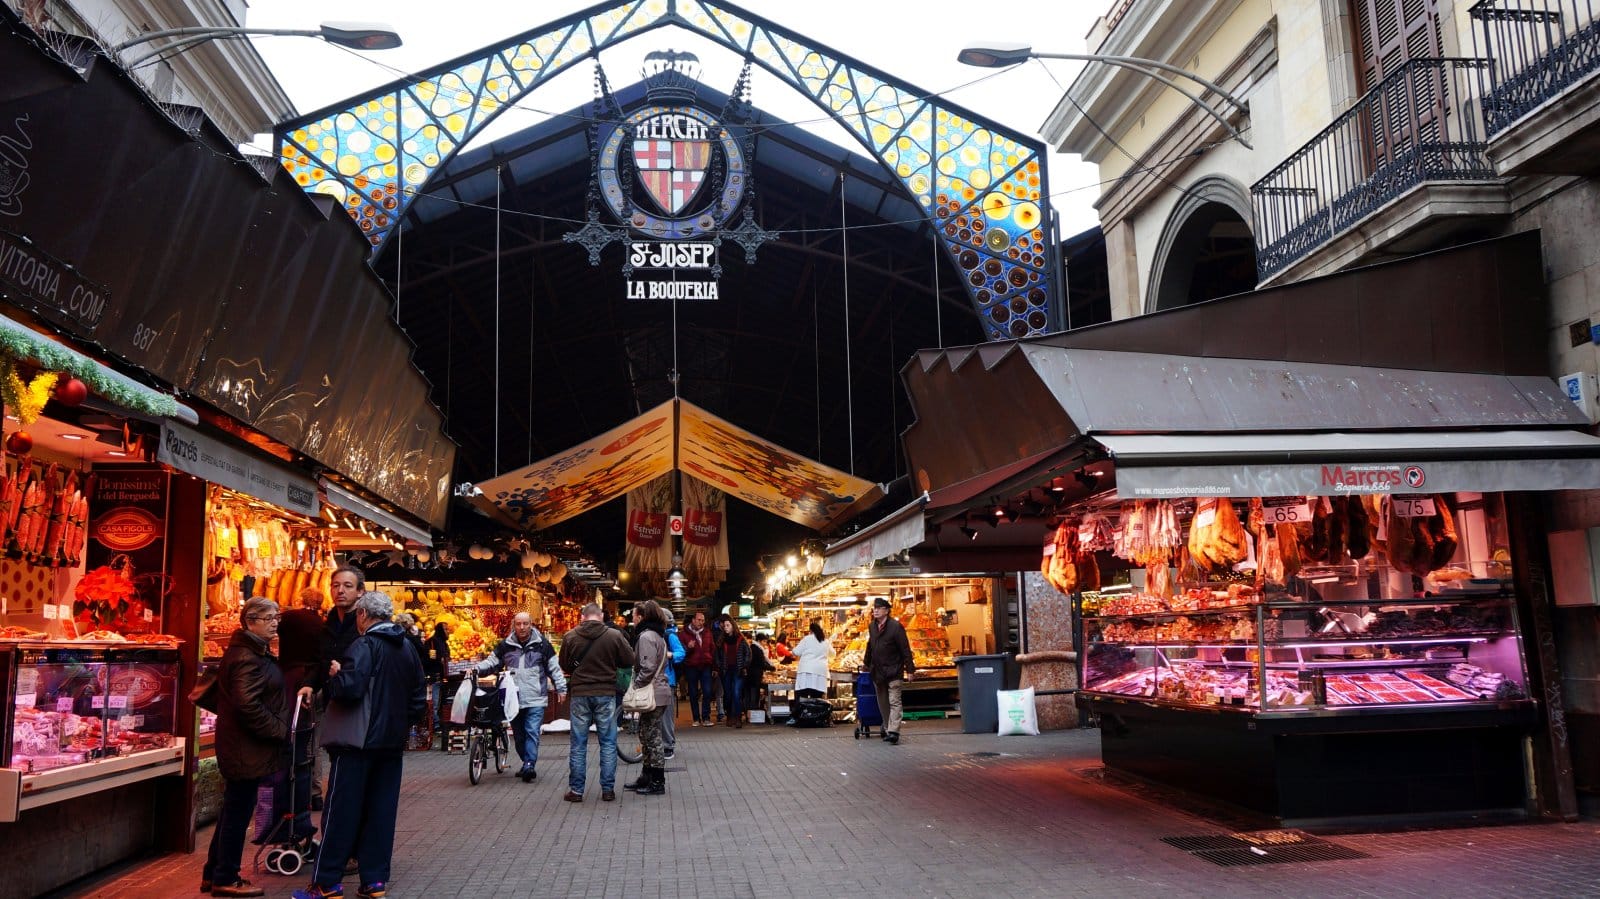 <p class="wp-caption-text">Image Credit: Shutterstock / Tang Yan Song</p>  <p><span>La Boqueria Market, officially known as Mercat de Sant Josep de la Boqueria, highlights Barcelona’s rich culinary heritage. Located along the bustling Las Ramblas, this market is a blend of colors, aromas, and flavors, offering an extensive array of local and exotic produce, meats, seafood, cheeses, and sweets. It’s a culinary exhibition showcasing the freshest ingredients that form the backbone of Catalan cuisine. Here, visitors can explore various stalls selling everything from Iberian ham to artisanal chocolates, making it a paradise for food lovers. The market also hosts several bars and eateries, where you can savor traditional dishes prepared with ingredients sourced directly from the market’s vendors.</span></p>